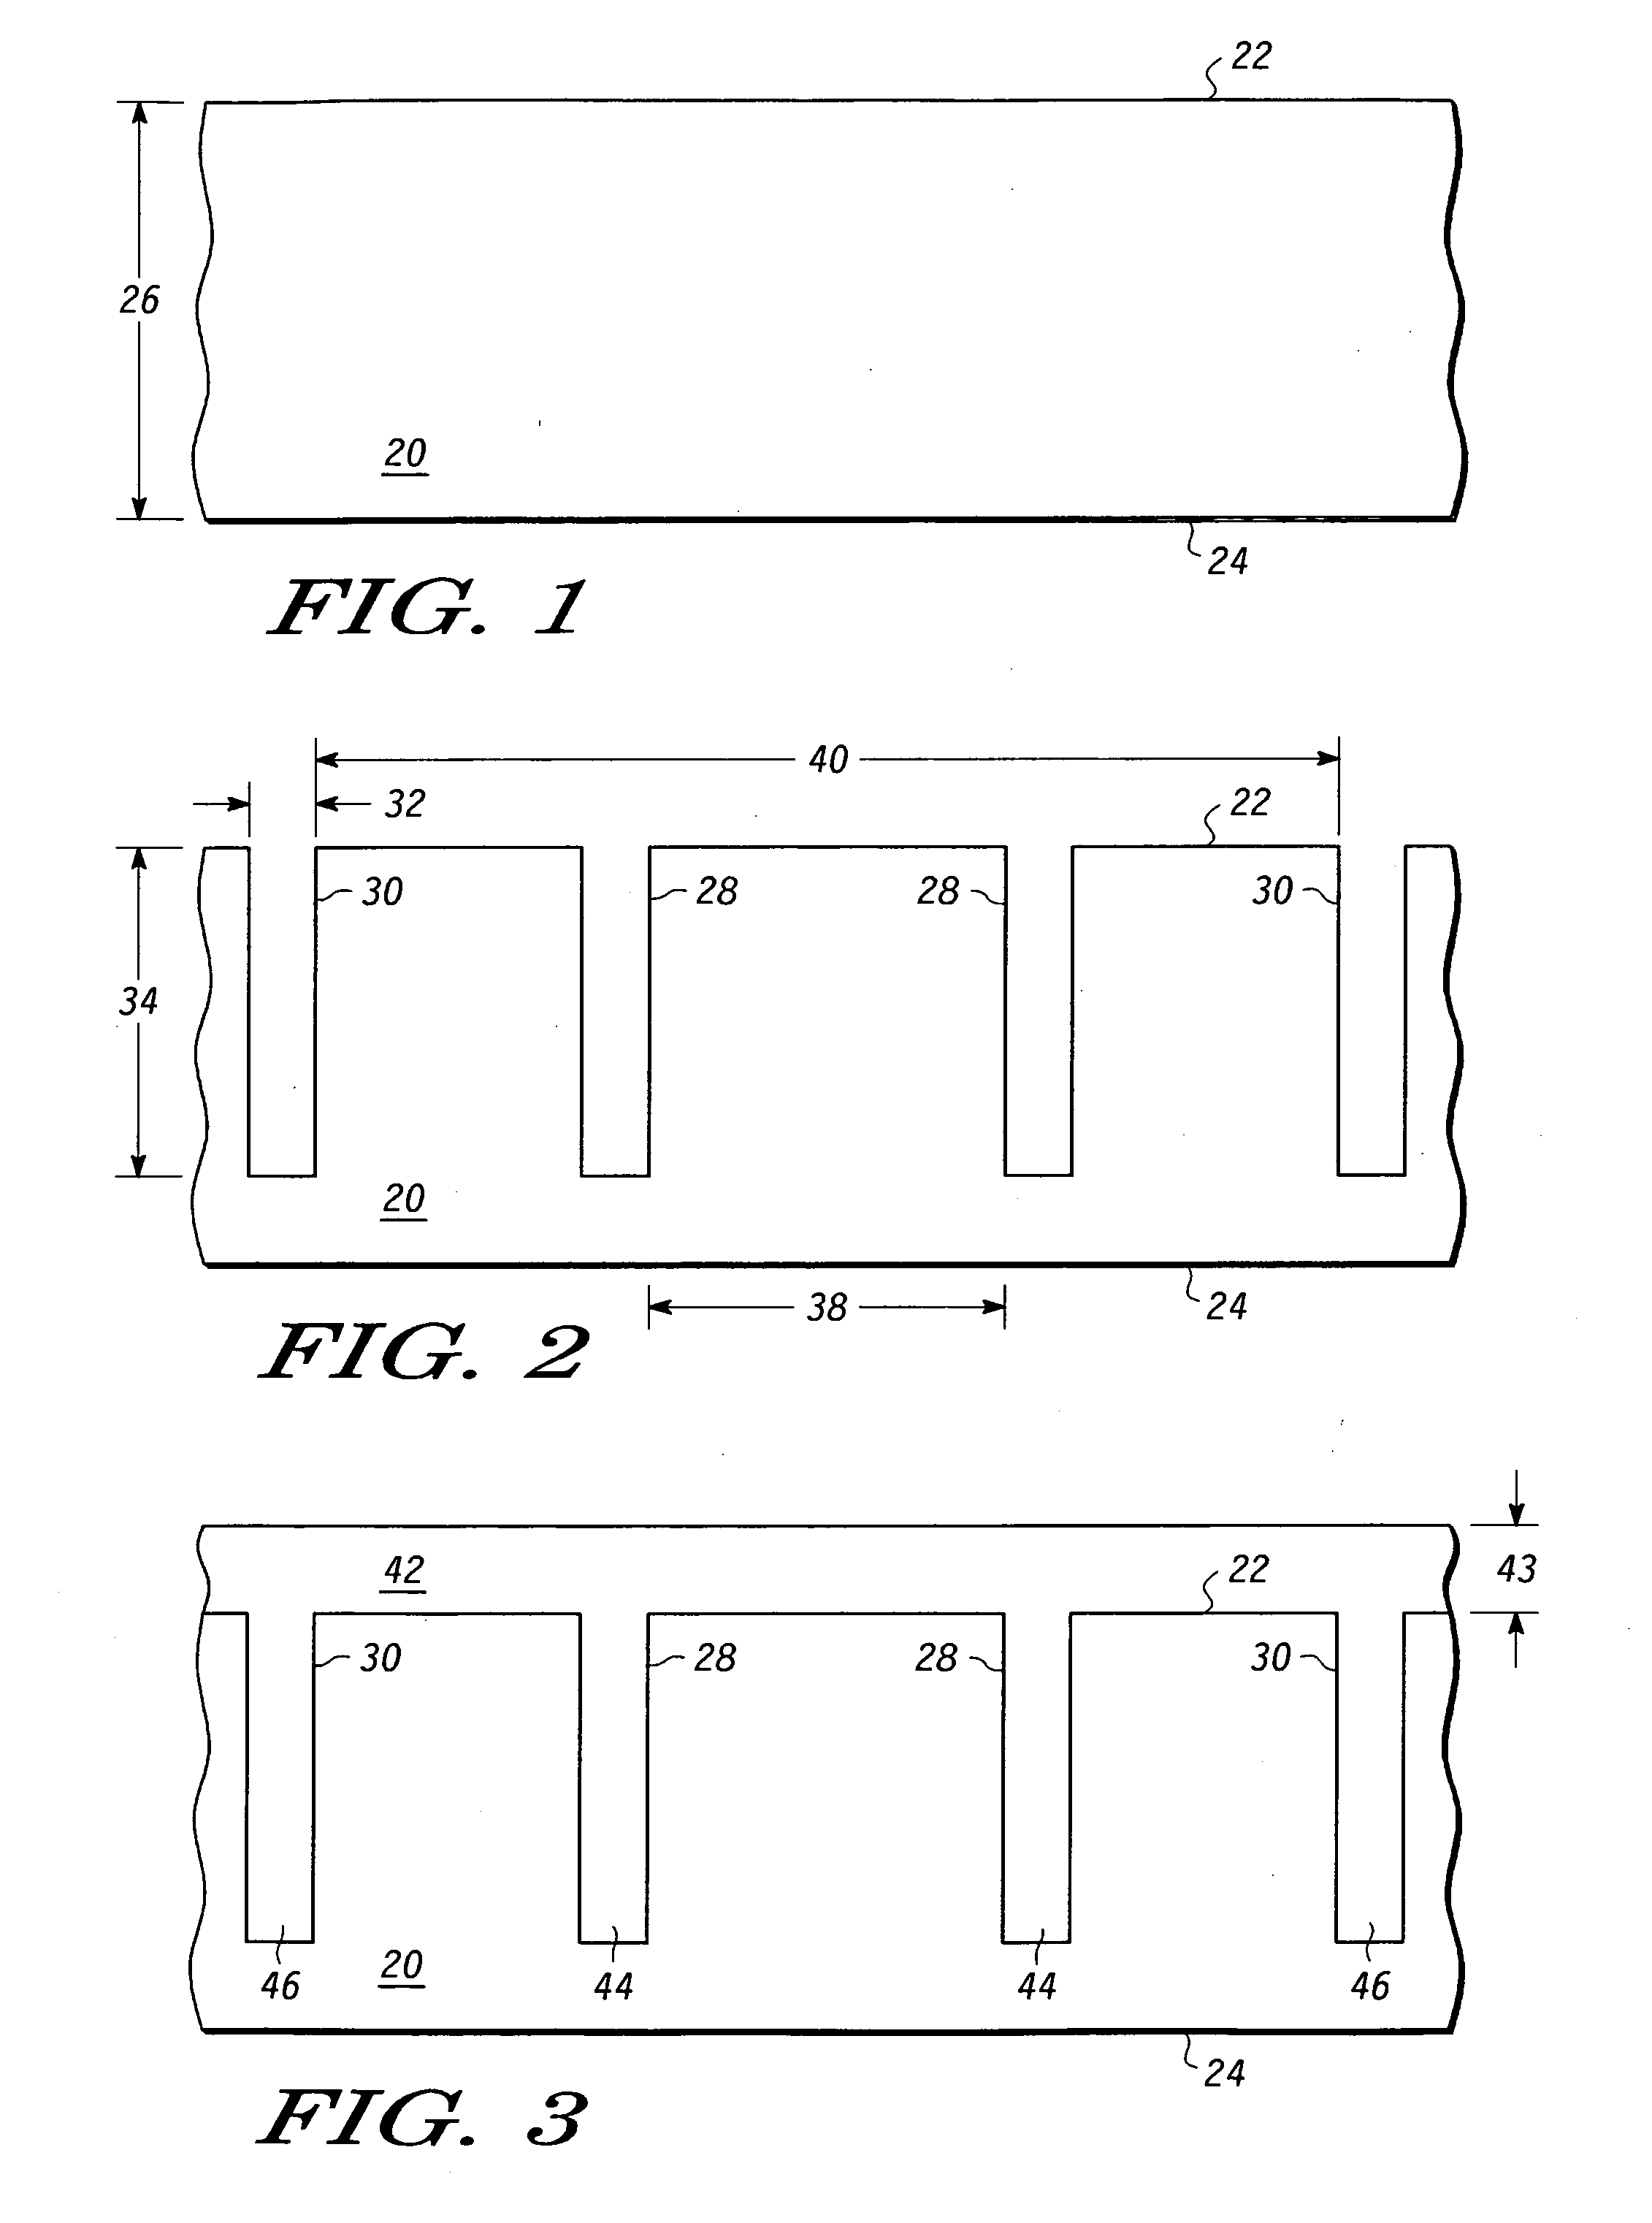 Microelectronic assembly and method for forming the same